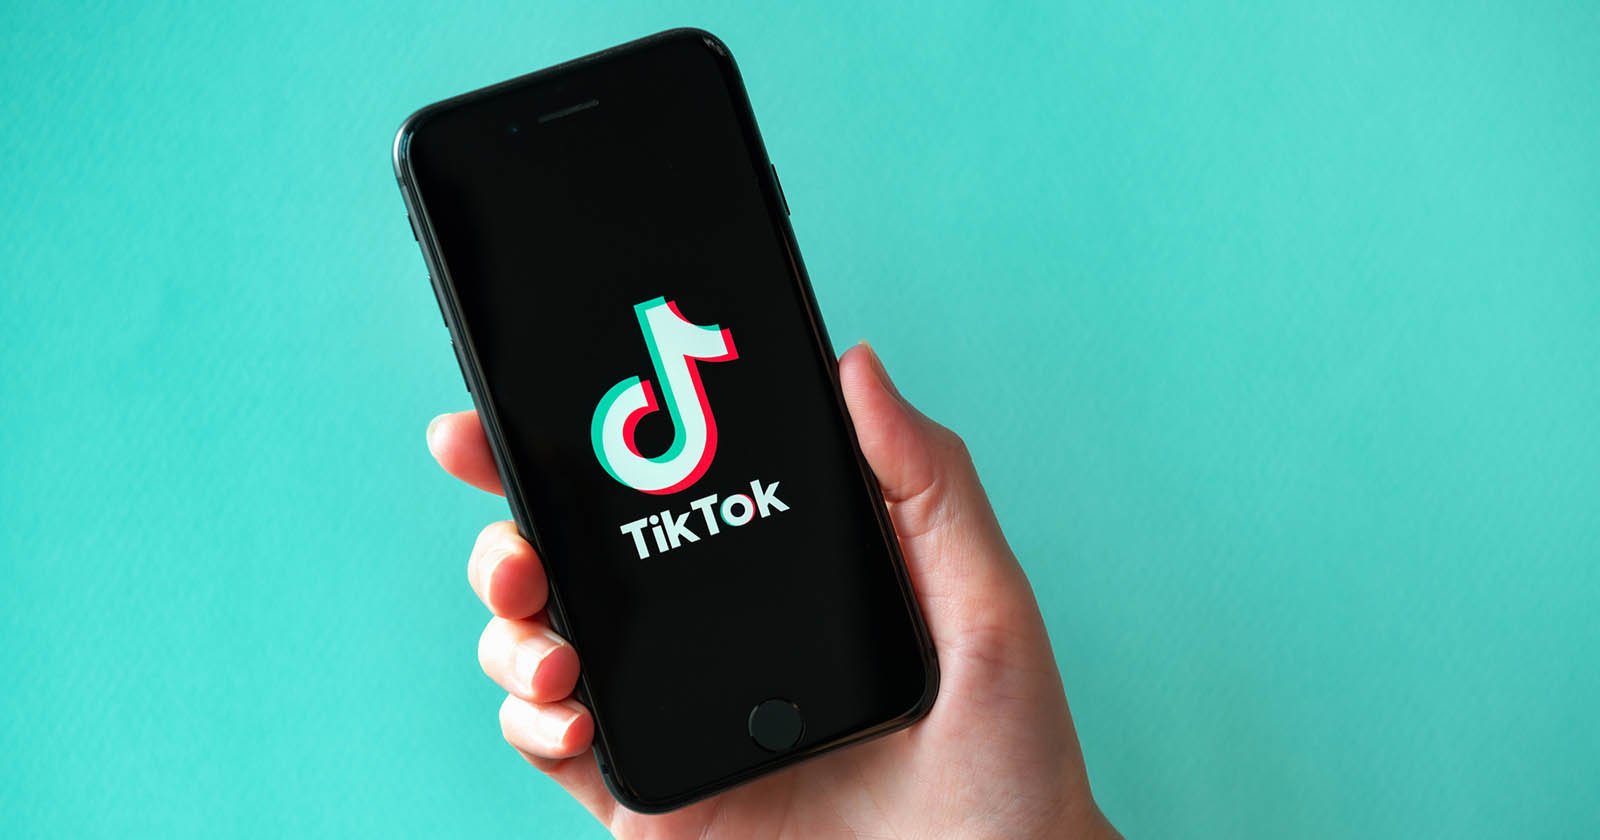  china says firmly opposes forced sale tiktok 